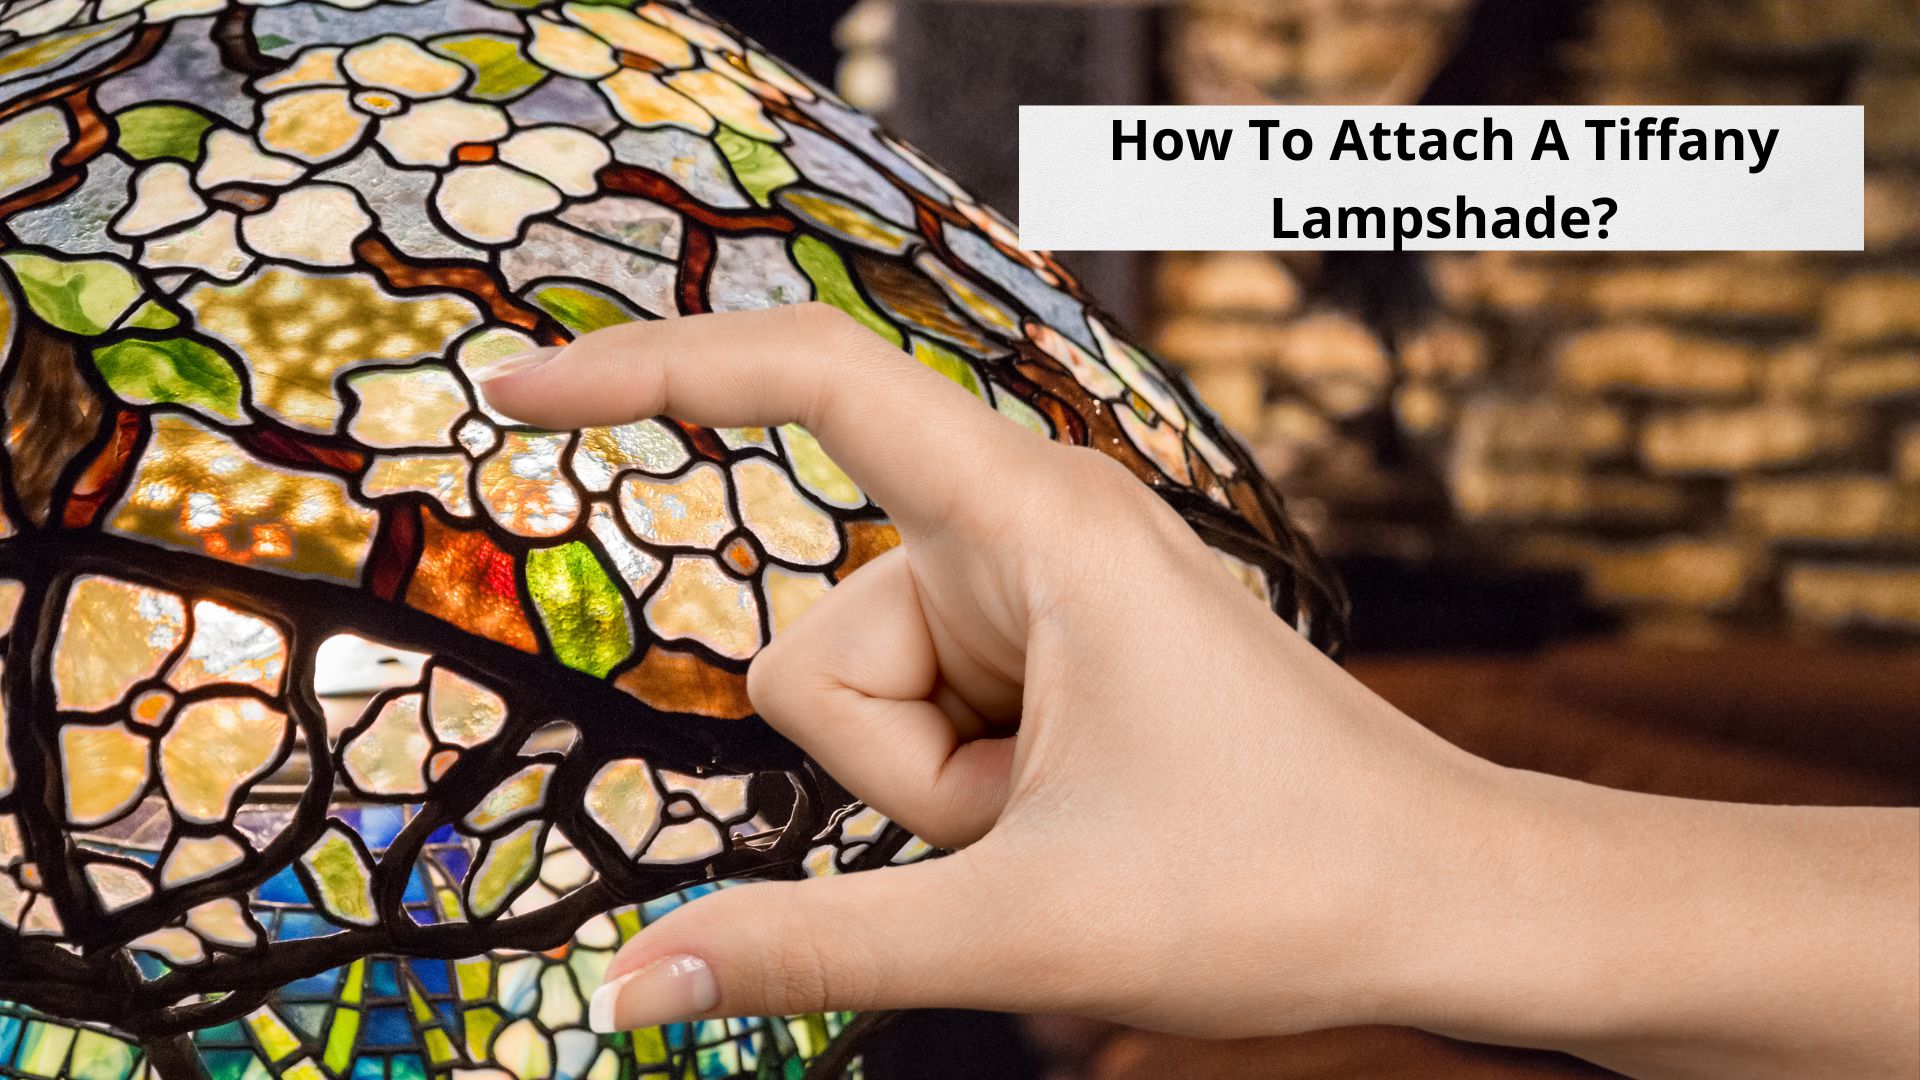 Image depicting an open hand over a Tiffany Lamp Shade, with a text question asking "How To Attach A Tiffany Lampshade?"